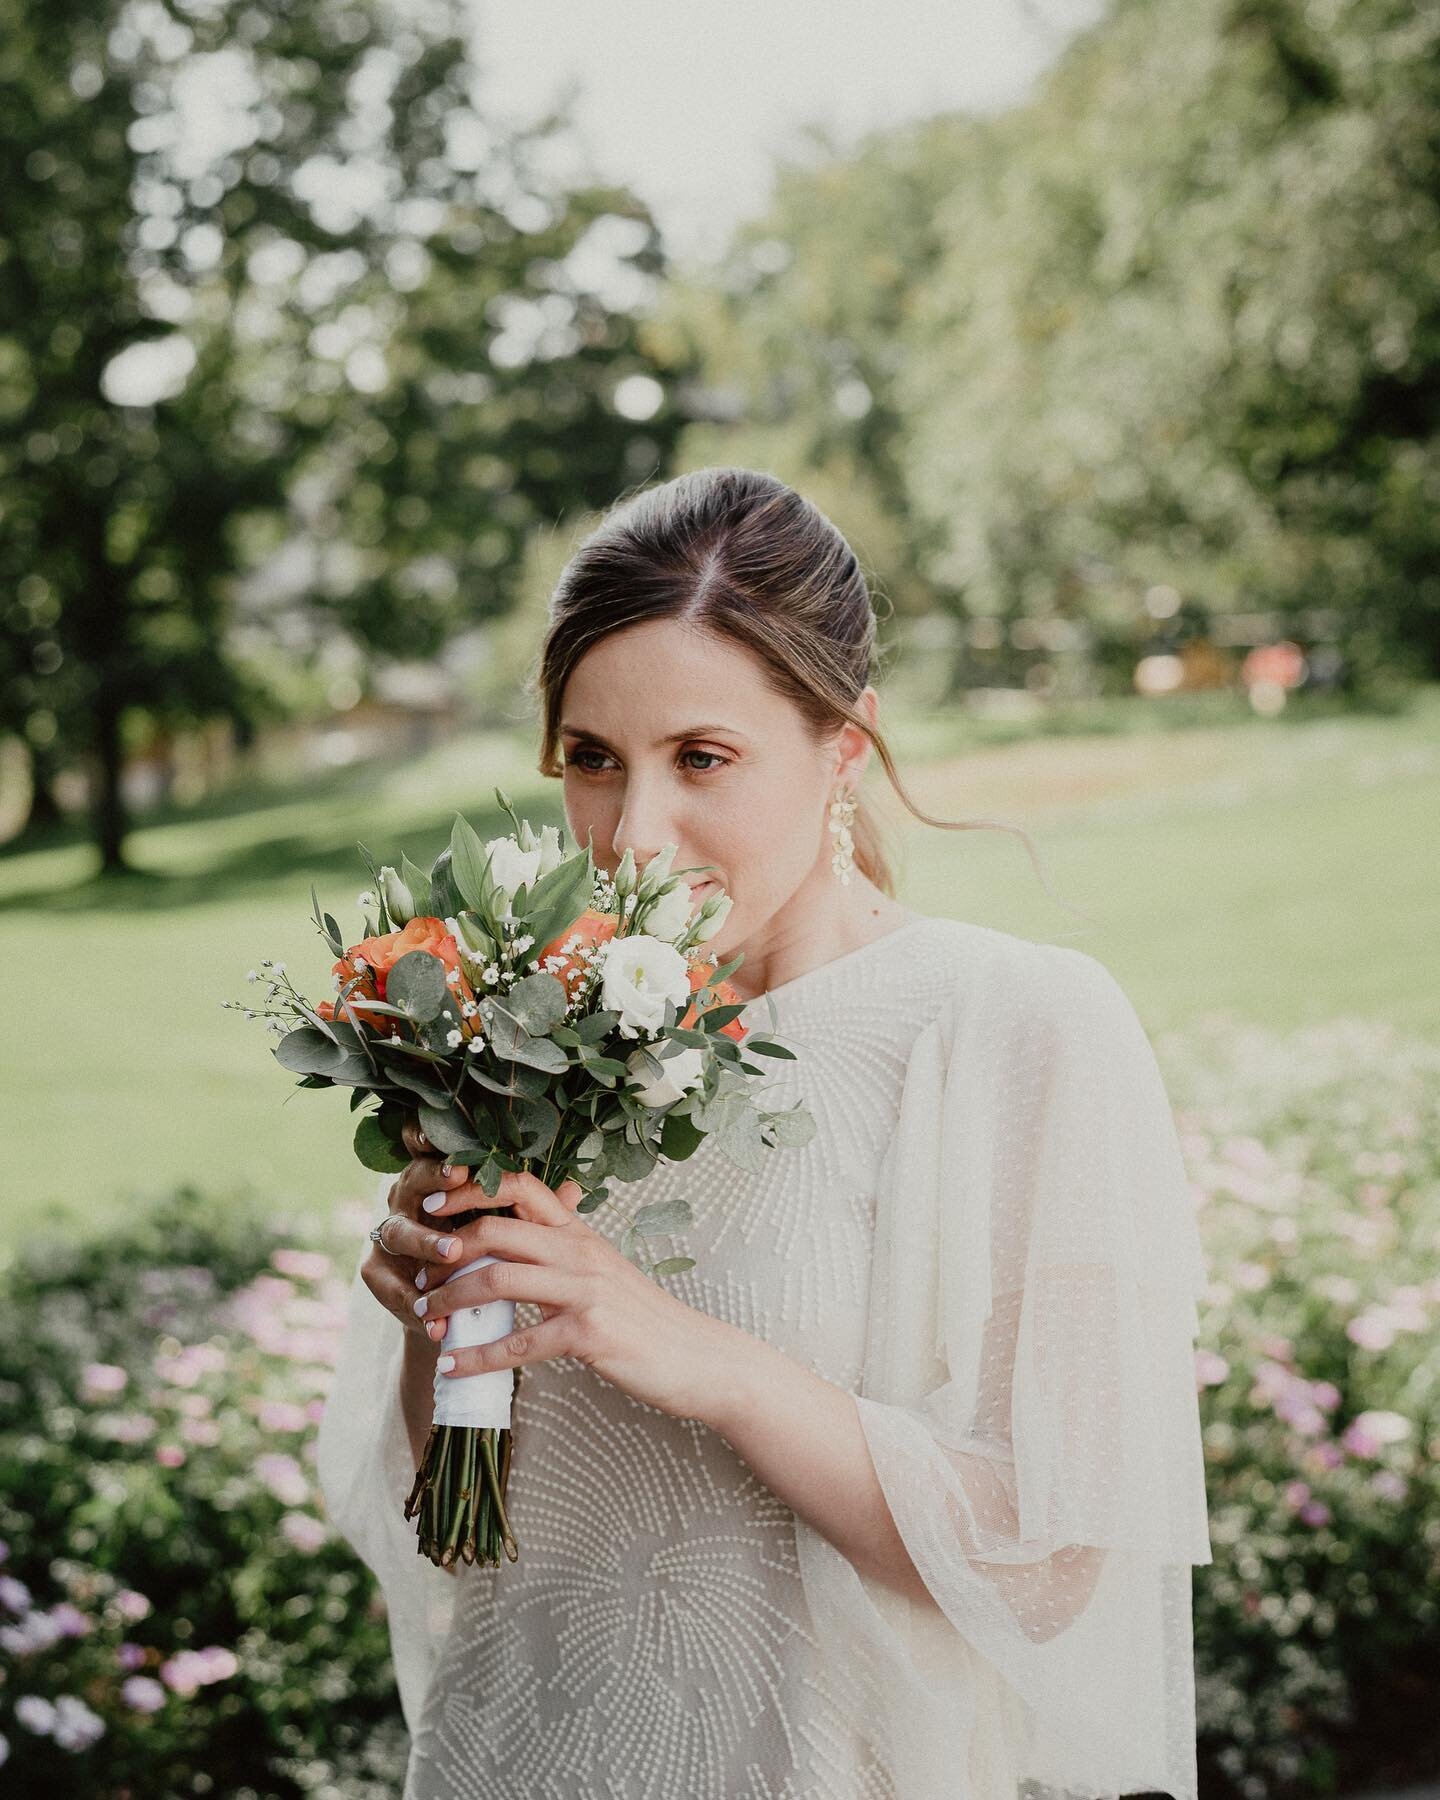 I&rsquo;m so excited that people want me to capture their special day! I&rsquo;ve got a few weddings booked now and it&rsquo;s such an honor!

Here&rsquo;s a shot from 2021 where the shoot took place in Oslo by the castle gardens ✨

#bykjos #photogra